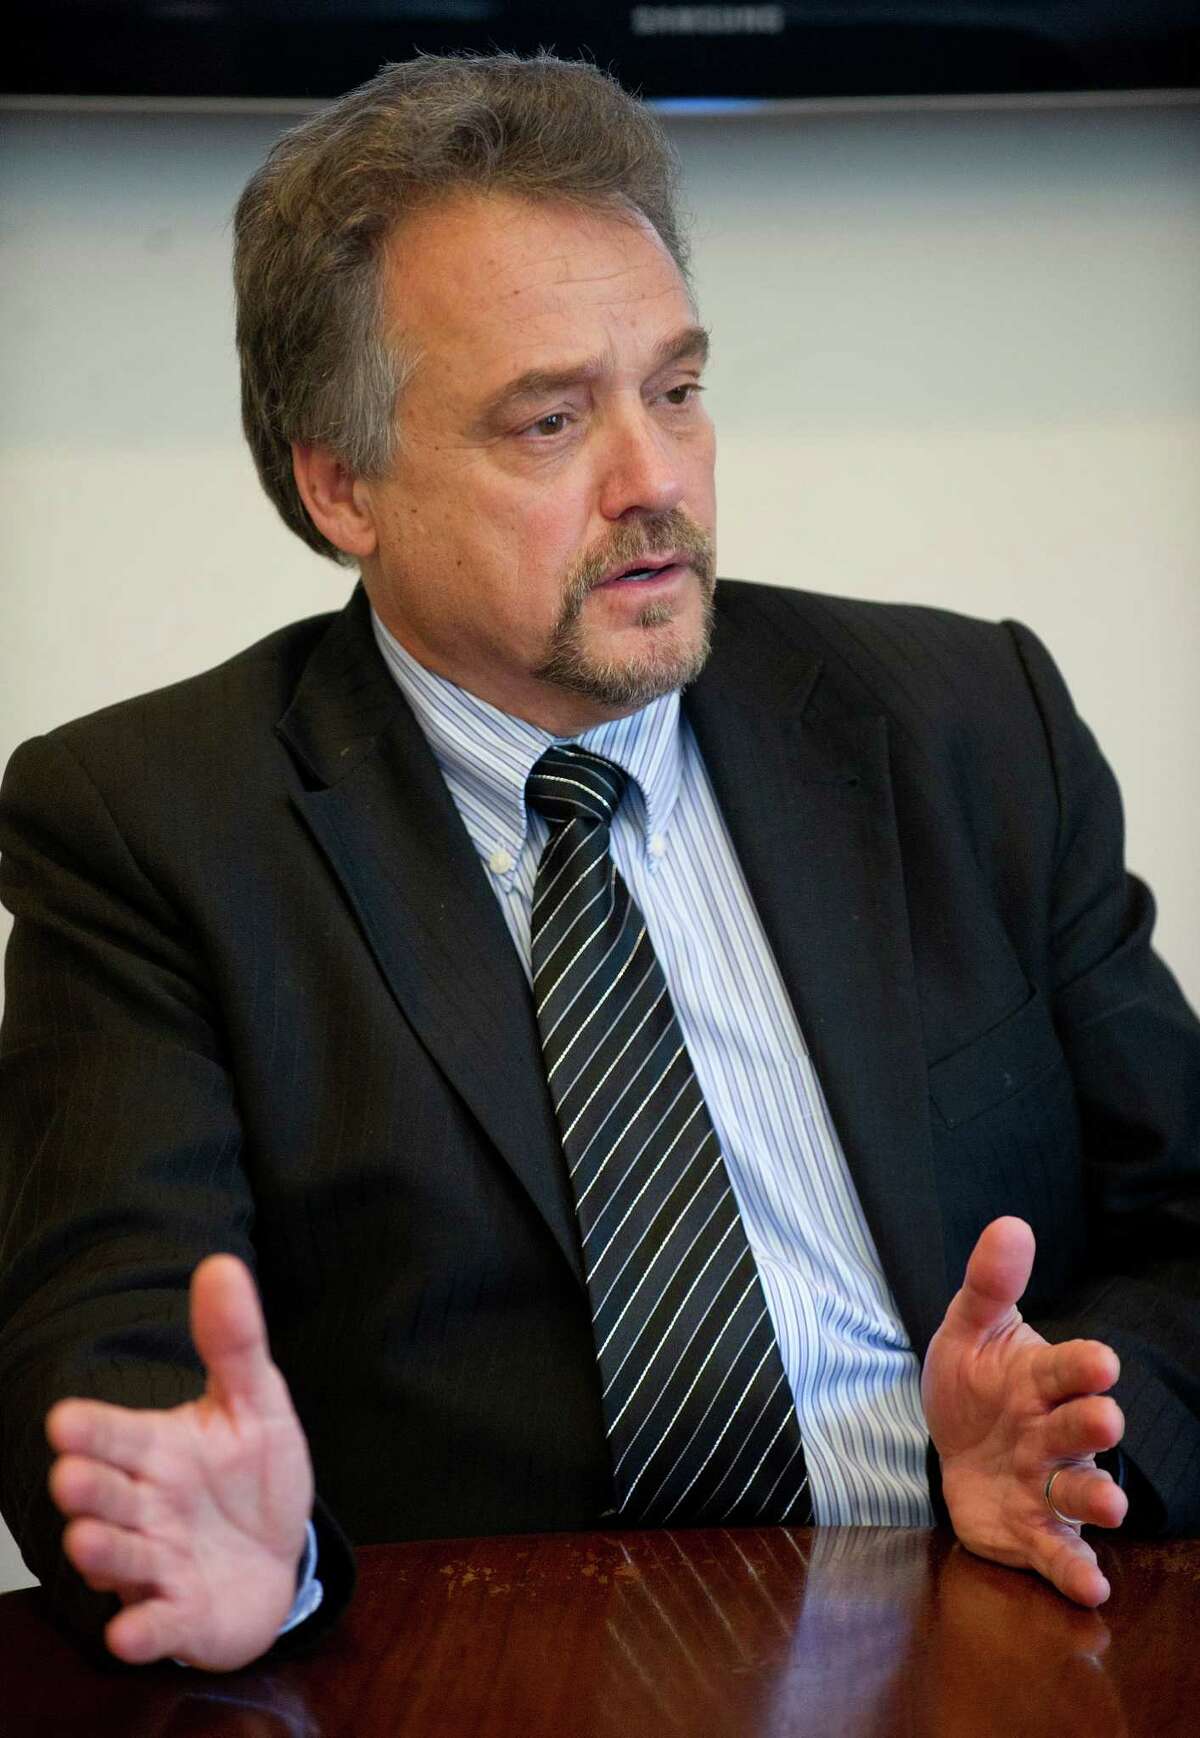 Metro-North President Joseph Giulietti speaks with reporters at the Metropolitan Transportation Authority offices in New York, NY, on Wednesday, February 26, 2014.